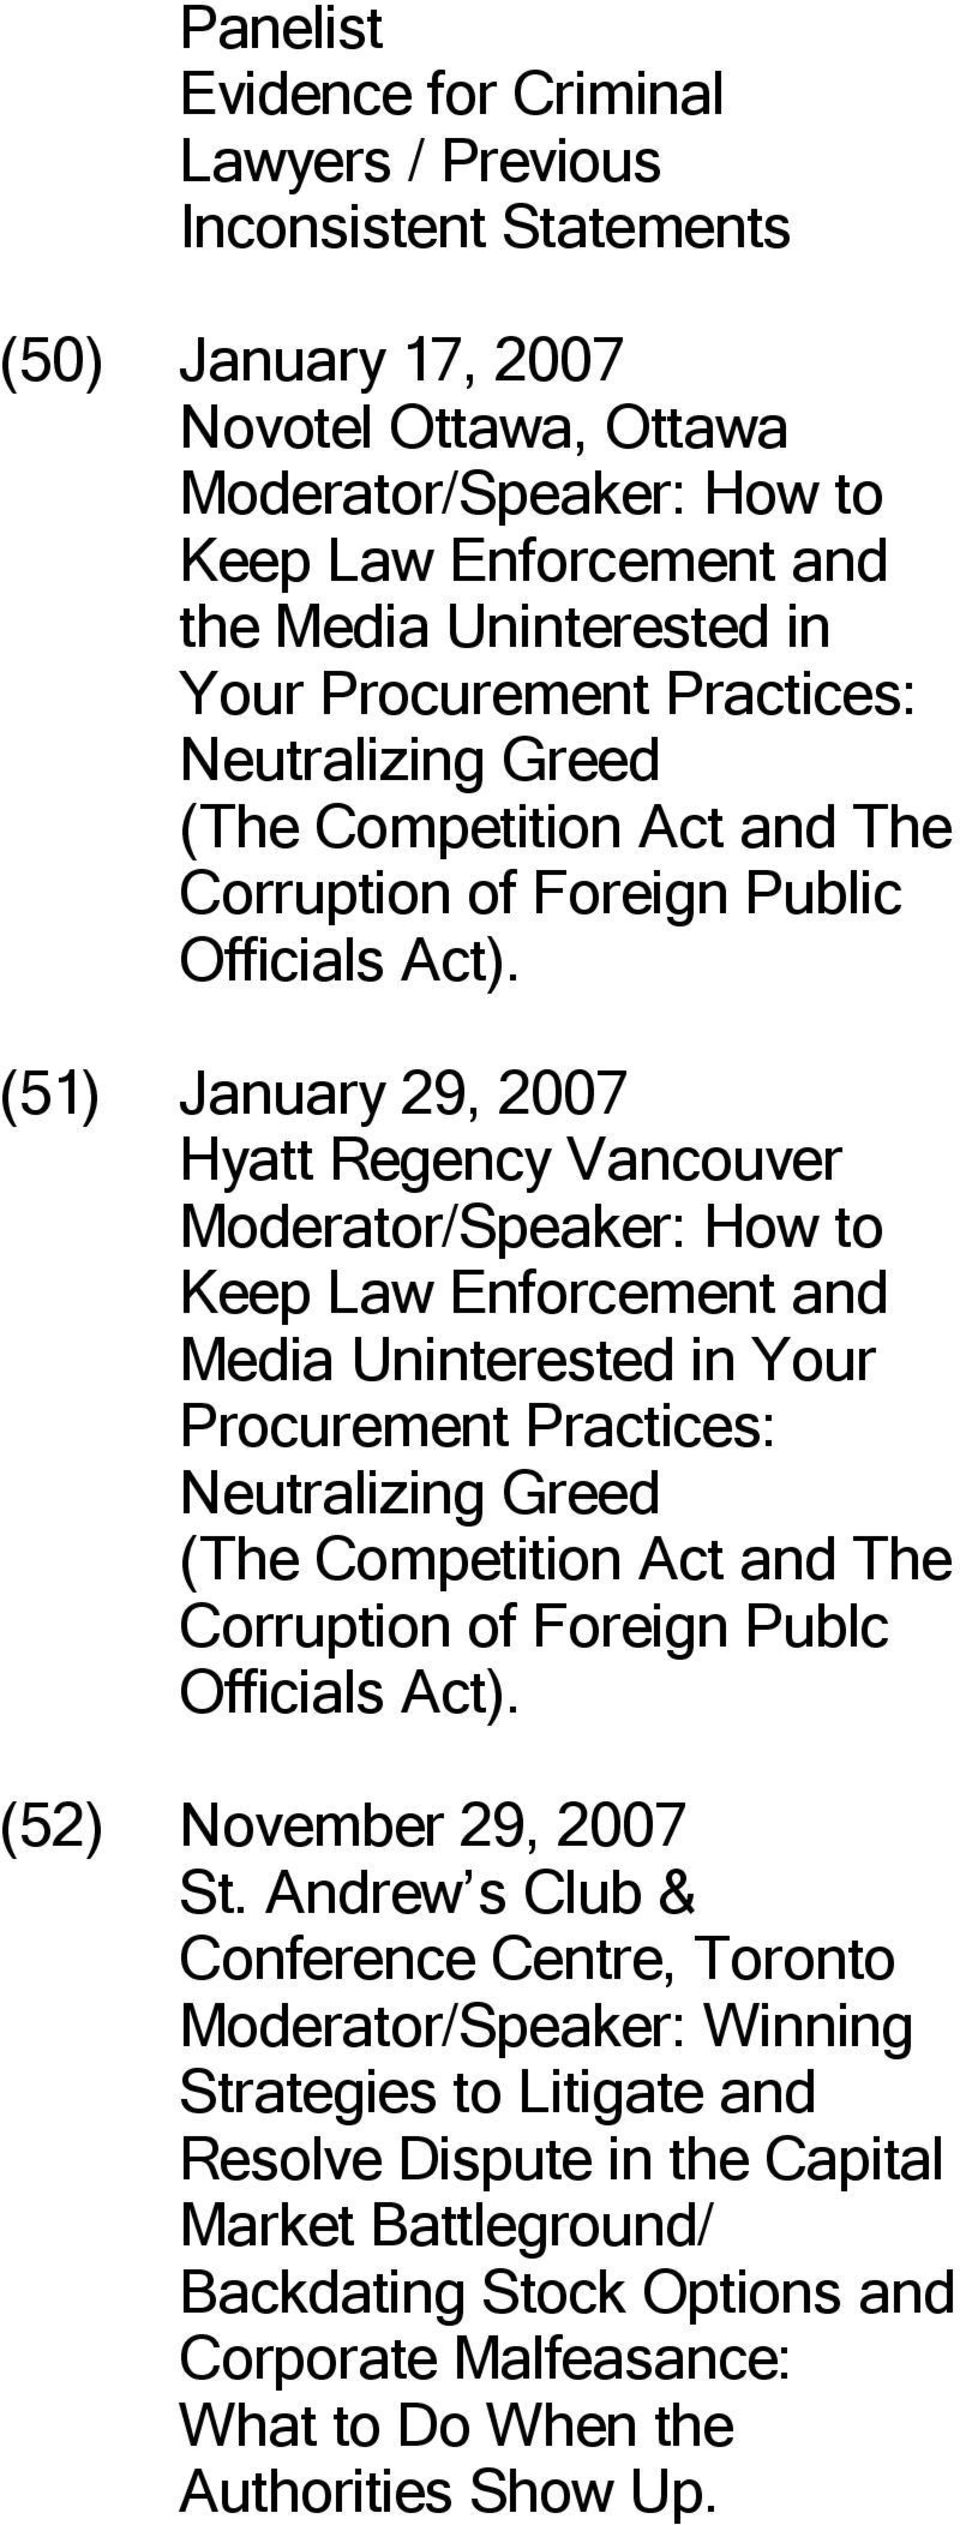 (51) January 29, 2007 Hyatt Regency Vancouver Moderator/Speaker: How to Keep Law Enforcement and Media Uninterested in Your Procurement Practices: Neutralizing Greed (The Competition Act and The